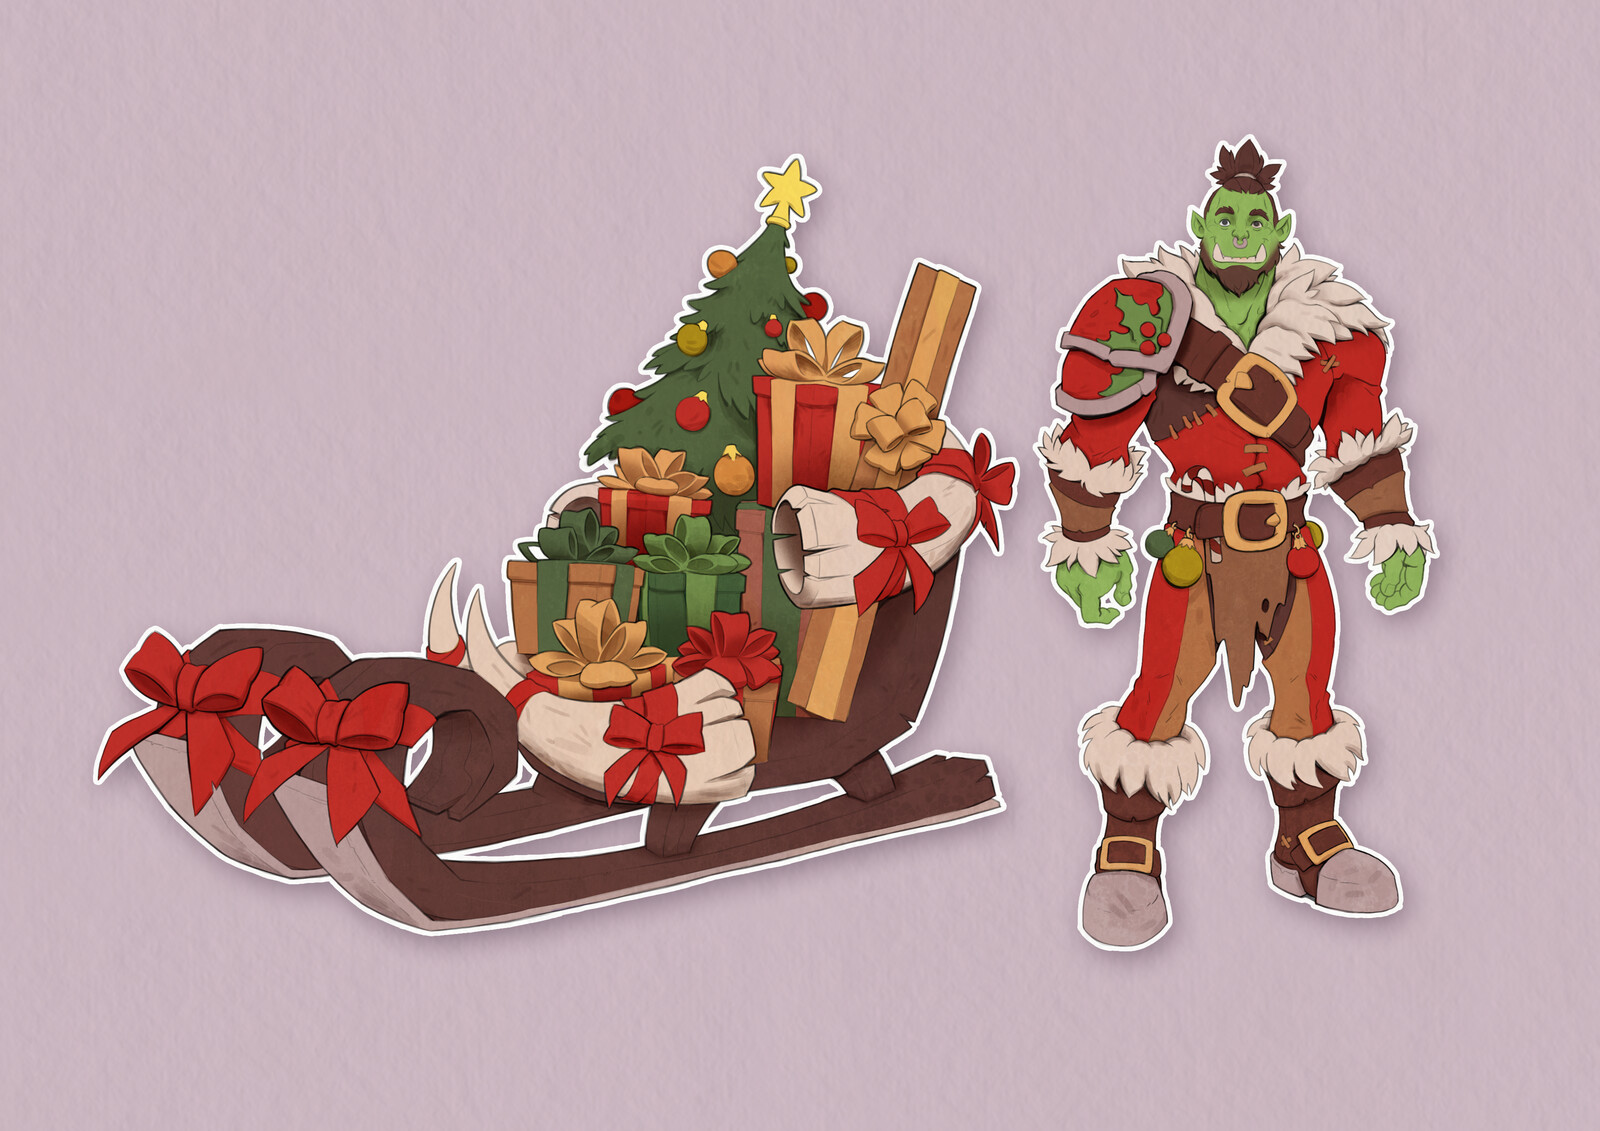 Final image for a new article on the 3DTotal-webpage:
https://3dtotal.com/tutorials/t/christmas-character-design-challenge-a-festive-orc-part-1#article-introduction